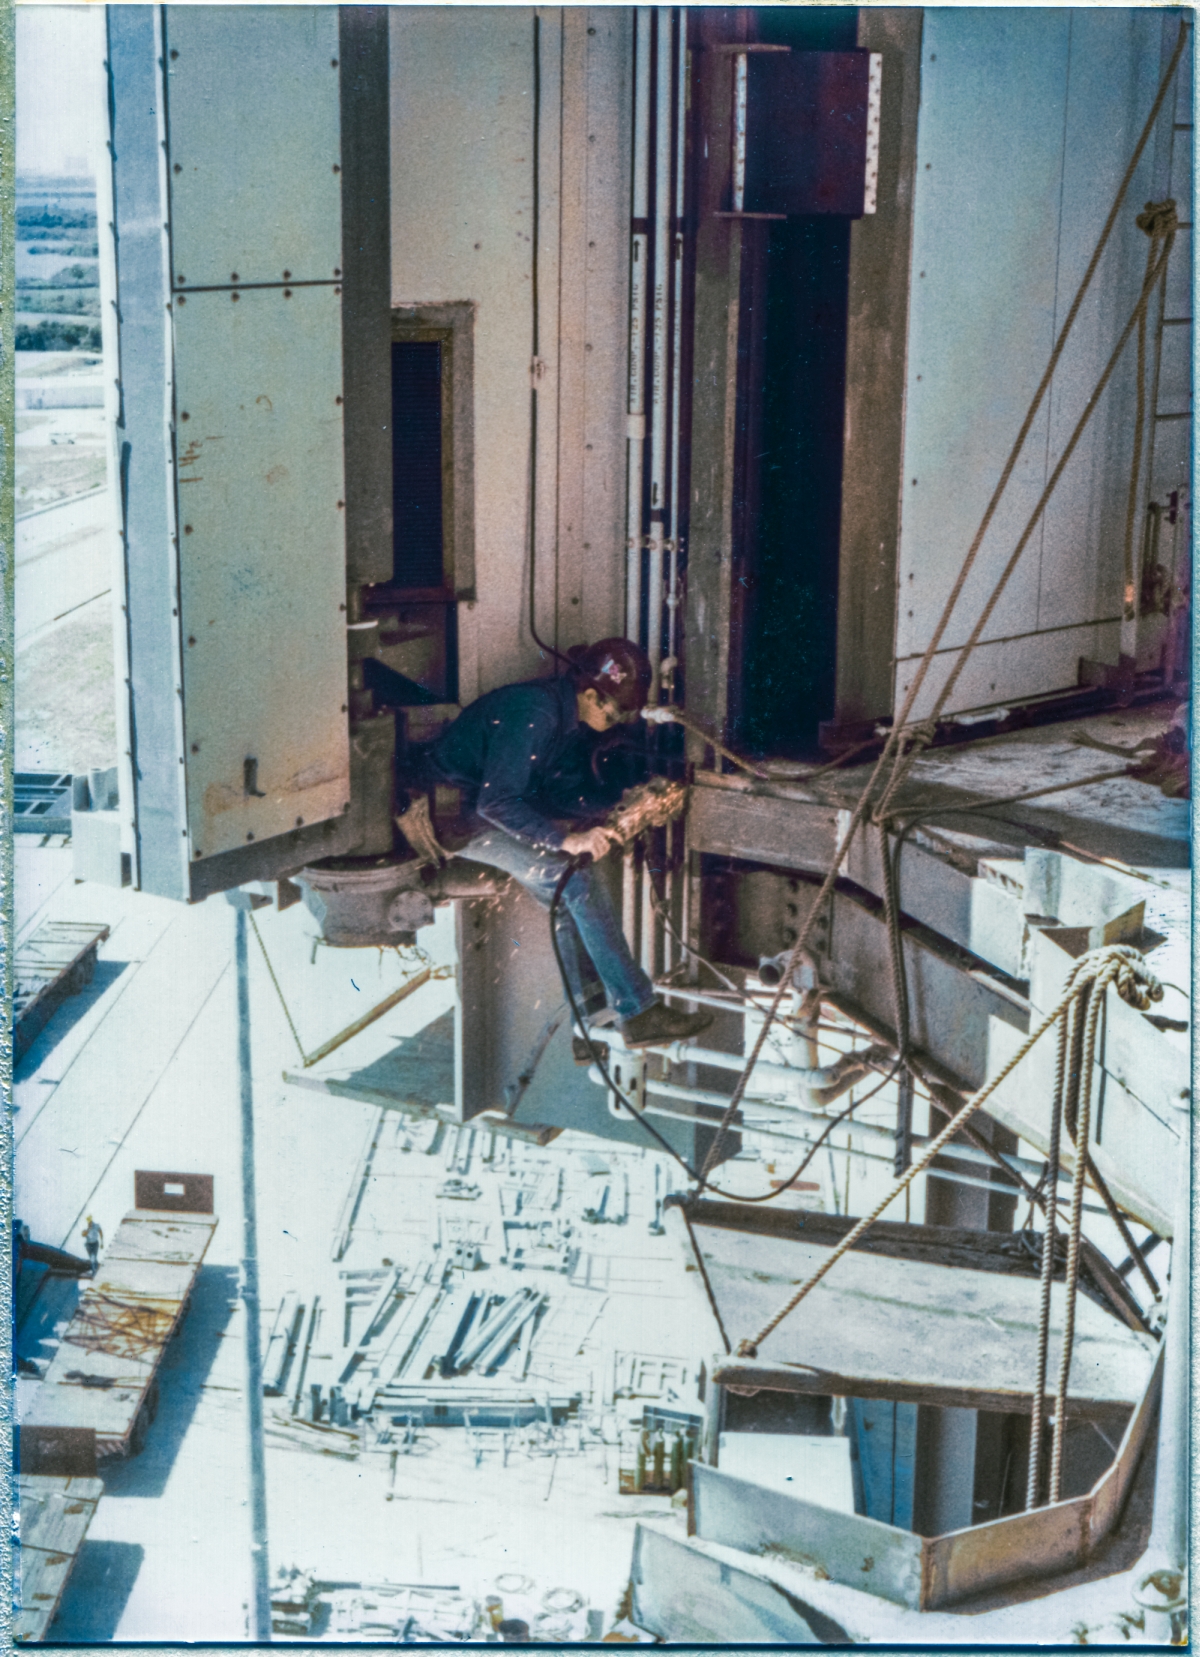 Image 059. Union Ironworker. Local 808. Working for Ivey's Steel Erectors on the Rotating Service Structure at Space Shuttle Launch Complex 39-B, Kennedy Space Center, Florida. I do not recall this man’s name, alas. No harness. This the way we did the work, back in the early 1980’s, and nobody minded, and nobody ever fell, and nobody ever even got sensibly hurt. He is grinding a weld smooth, which he just laid in to the new framing steel at elevation 135’-7” which is the Main Floor level of the Payload Changeout Room, and which abuts the top edge of the orbiter’s OMS Pods when the RSS is mated to it, and which was extensively modified to accommodate the installation of the OMS Pod Heated Purge Covers, which turned out to be a spectacularly-bad idea, both conceptually and physically. We did not like the OMS Pod Heated Purge Covers, and those ironworkers who were the most savvy regarding the ways of things like this disliked them the most. They knew what was coming. And they told those of us in the field trailers, and we told NASA, and NASA handed it to their best engineers to give it their regarded consideration… and then told us to proceed with the Covers, anyway. And just as those most-savvy ironworkers said it would, it did not end well. Photo by James MacLaren.